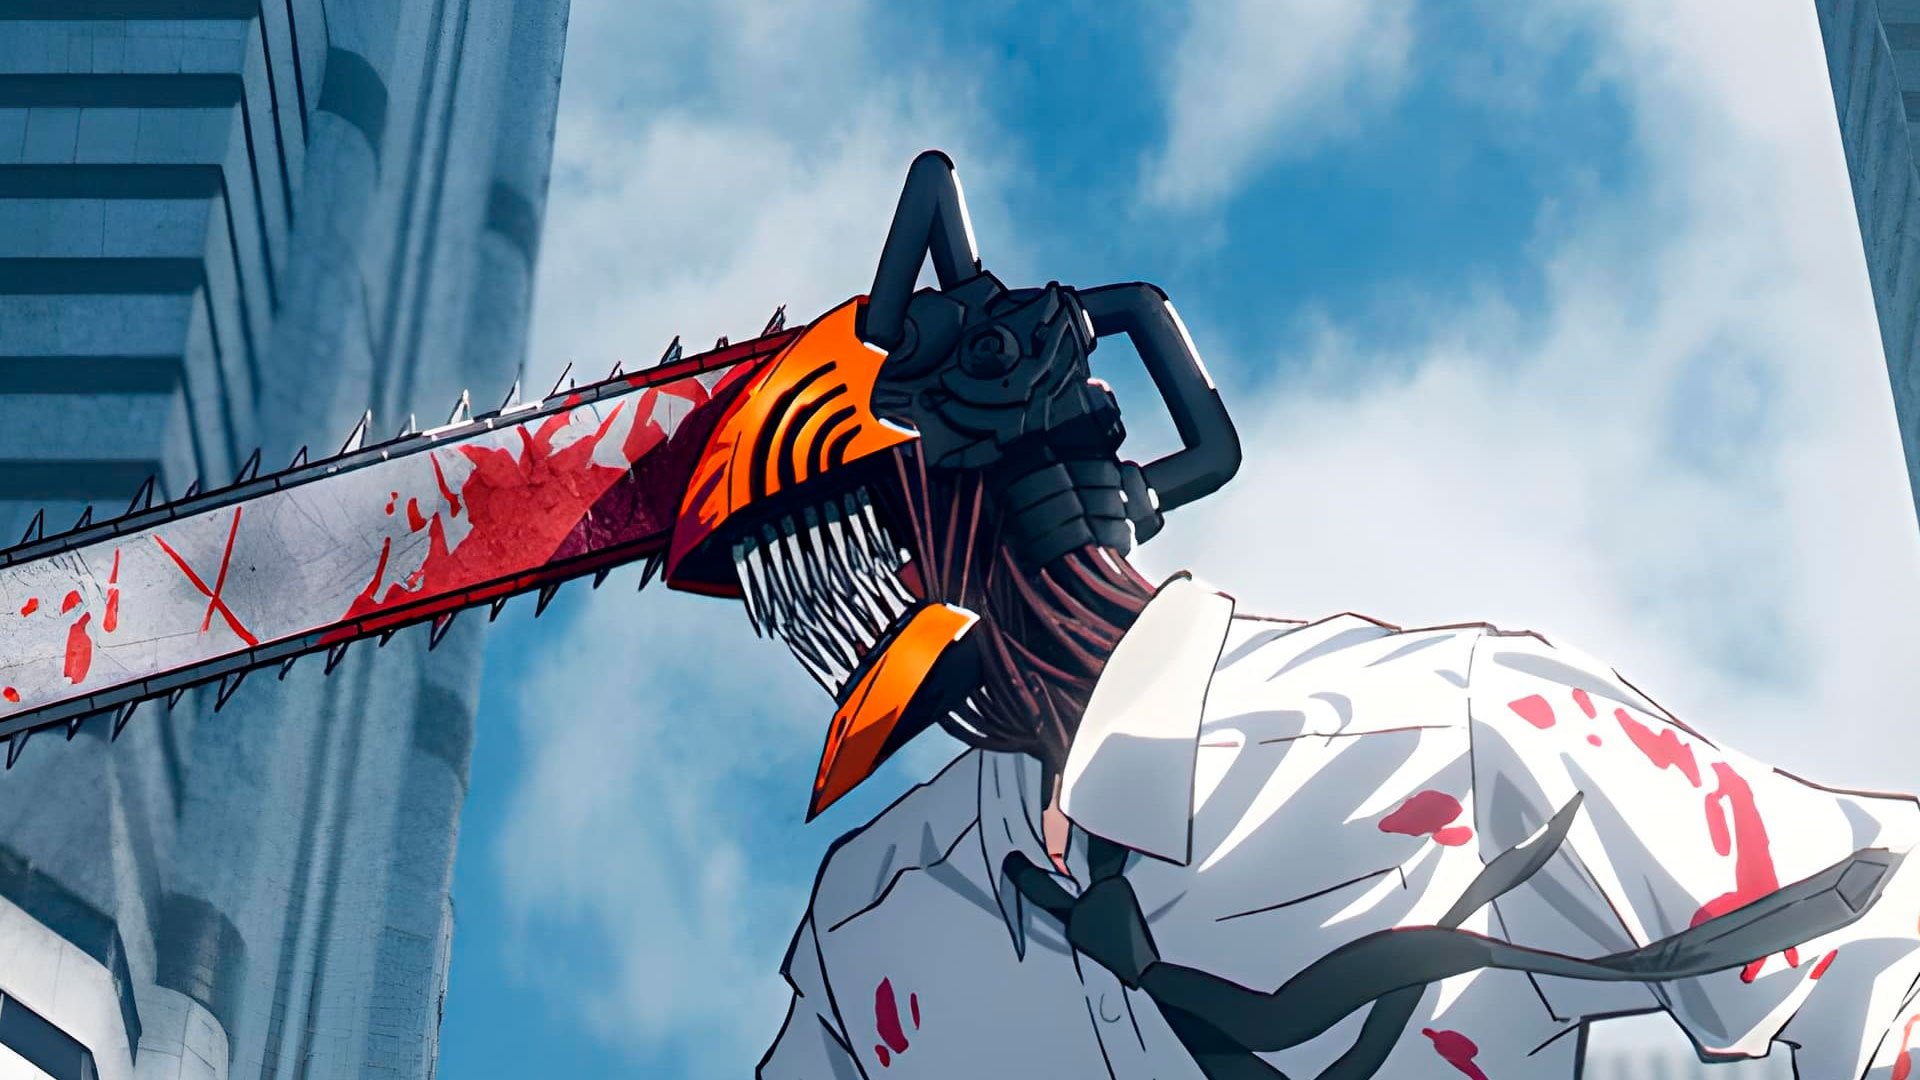 Crunchyroll Reveals 'Chainsaw Man' Trailer and Images